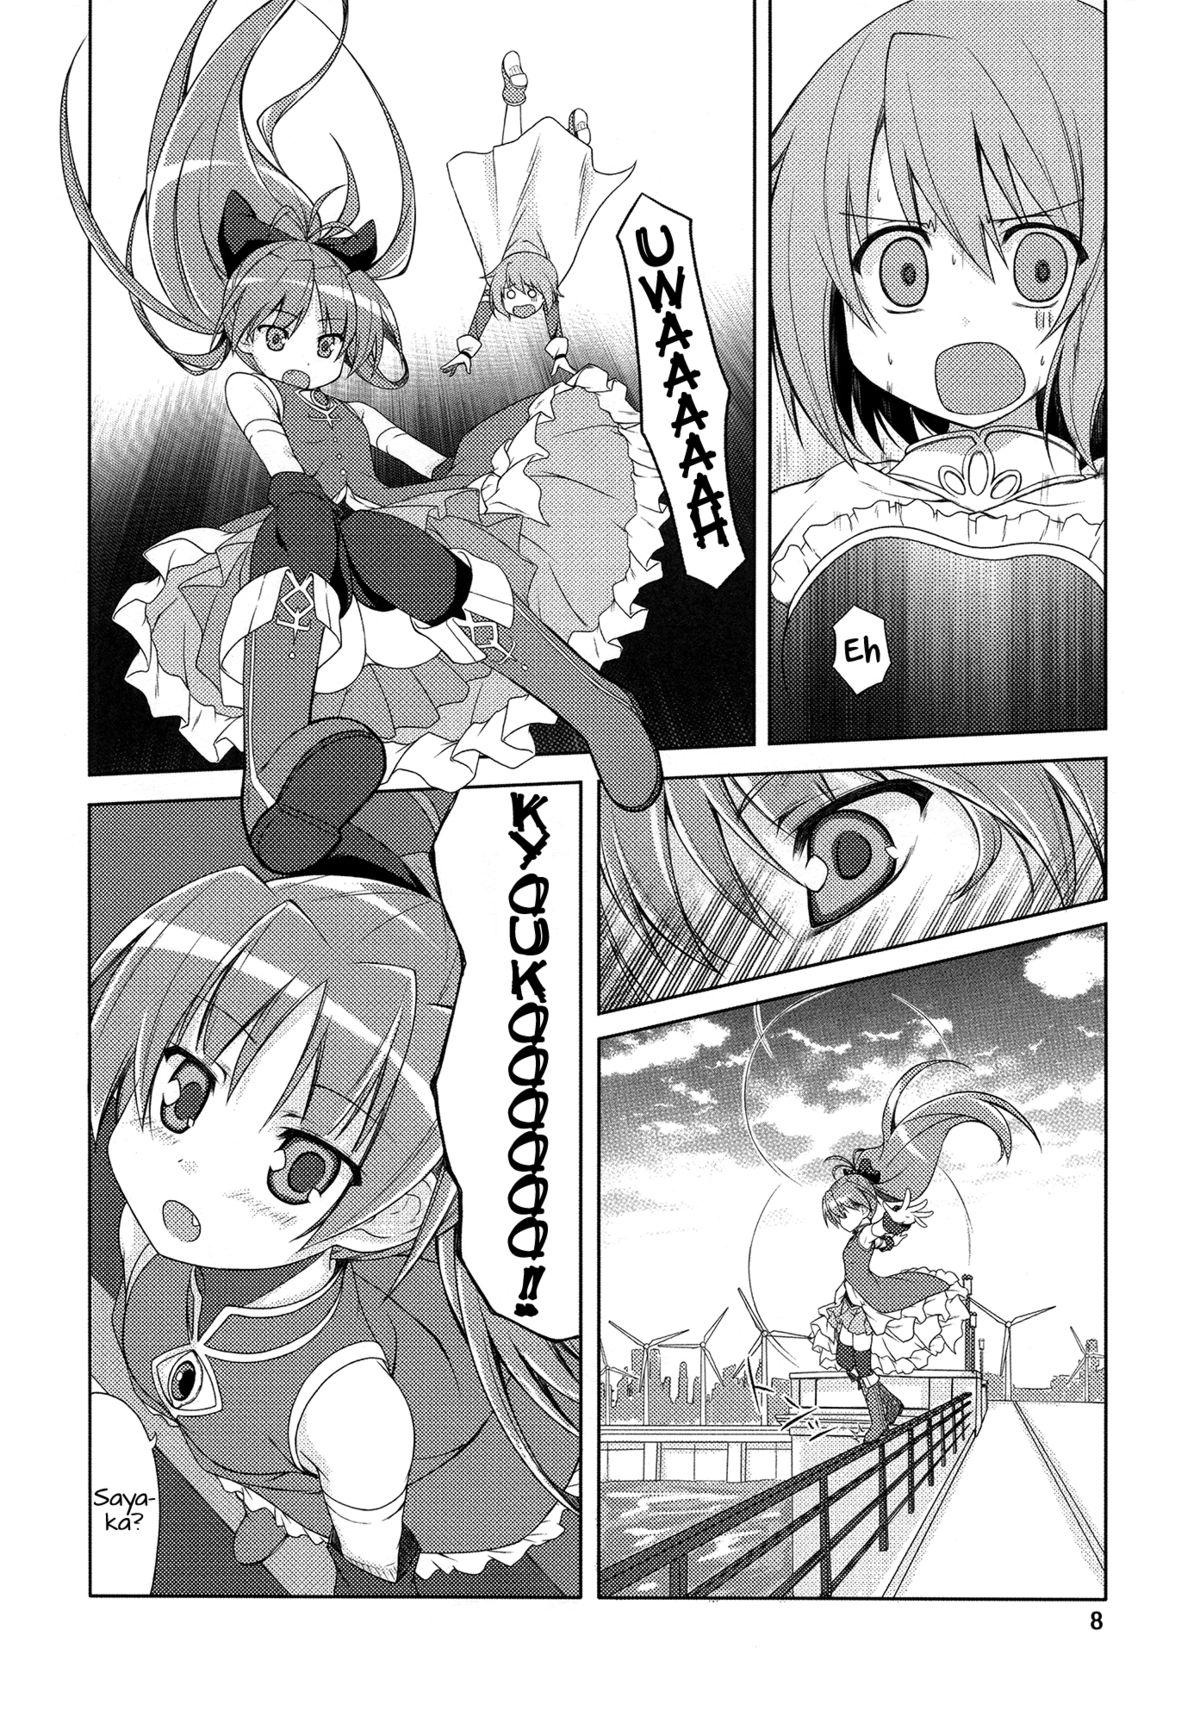 Ejaculations Be with you - Puella magi madoka magica Solo Female - Page 7